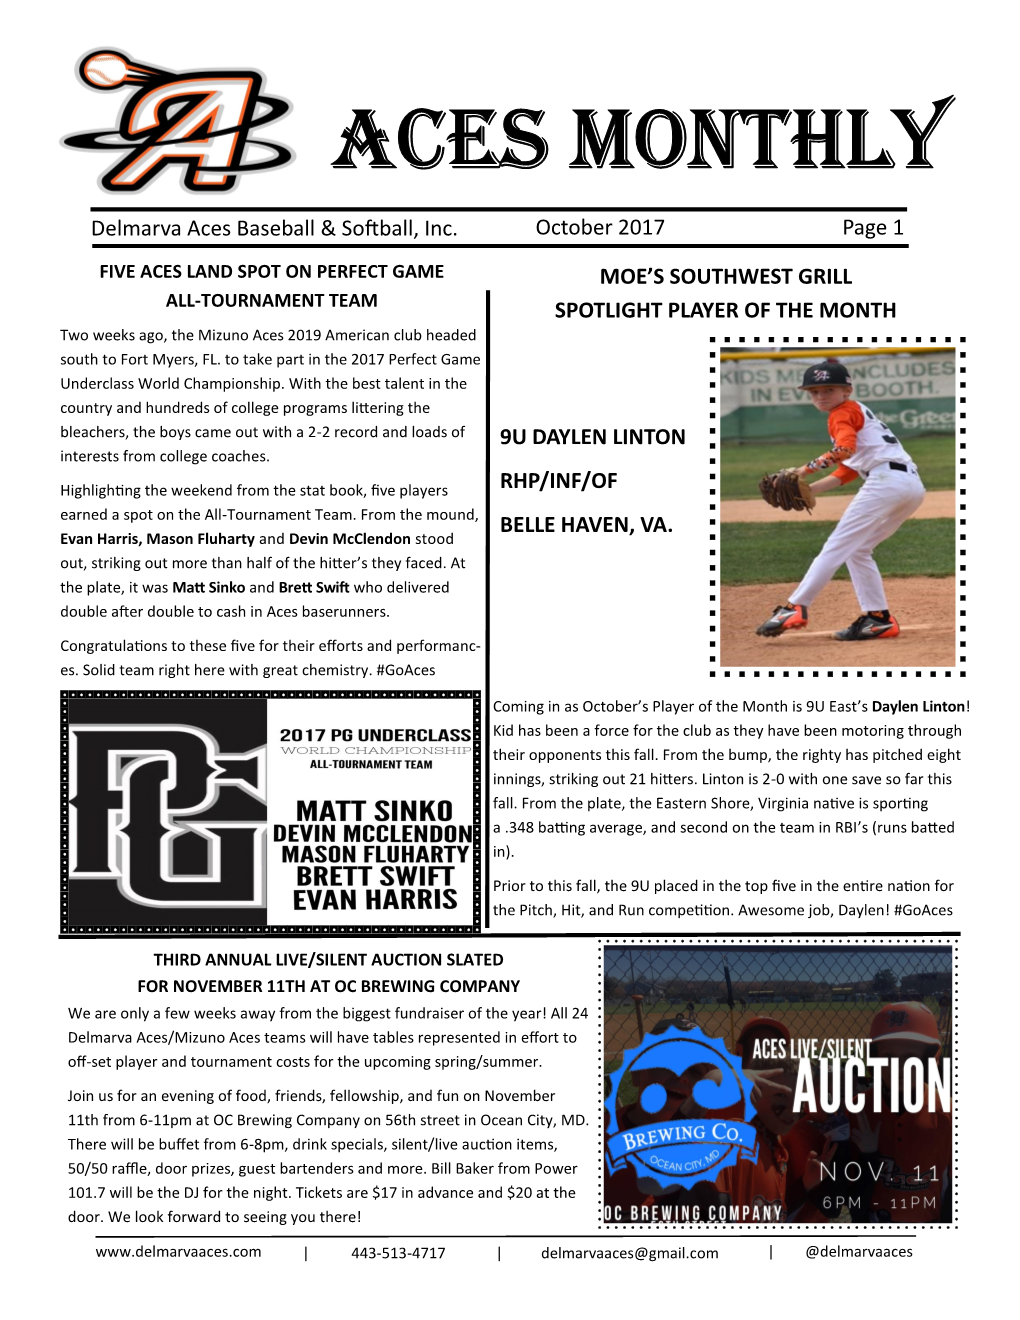 Aces Monthly